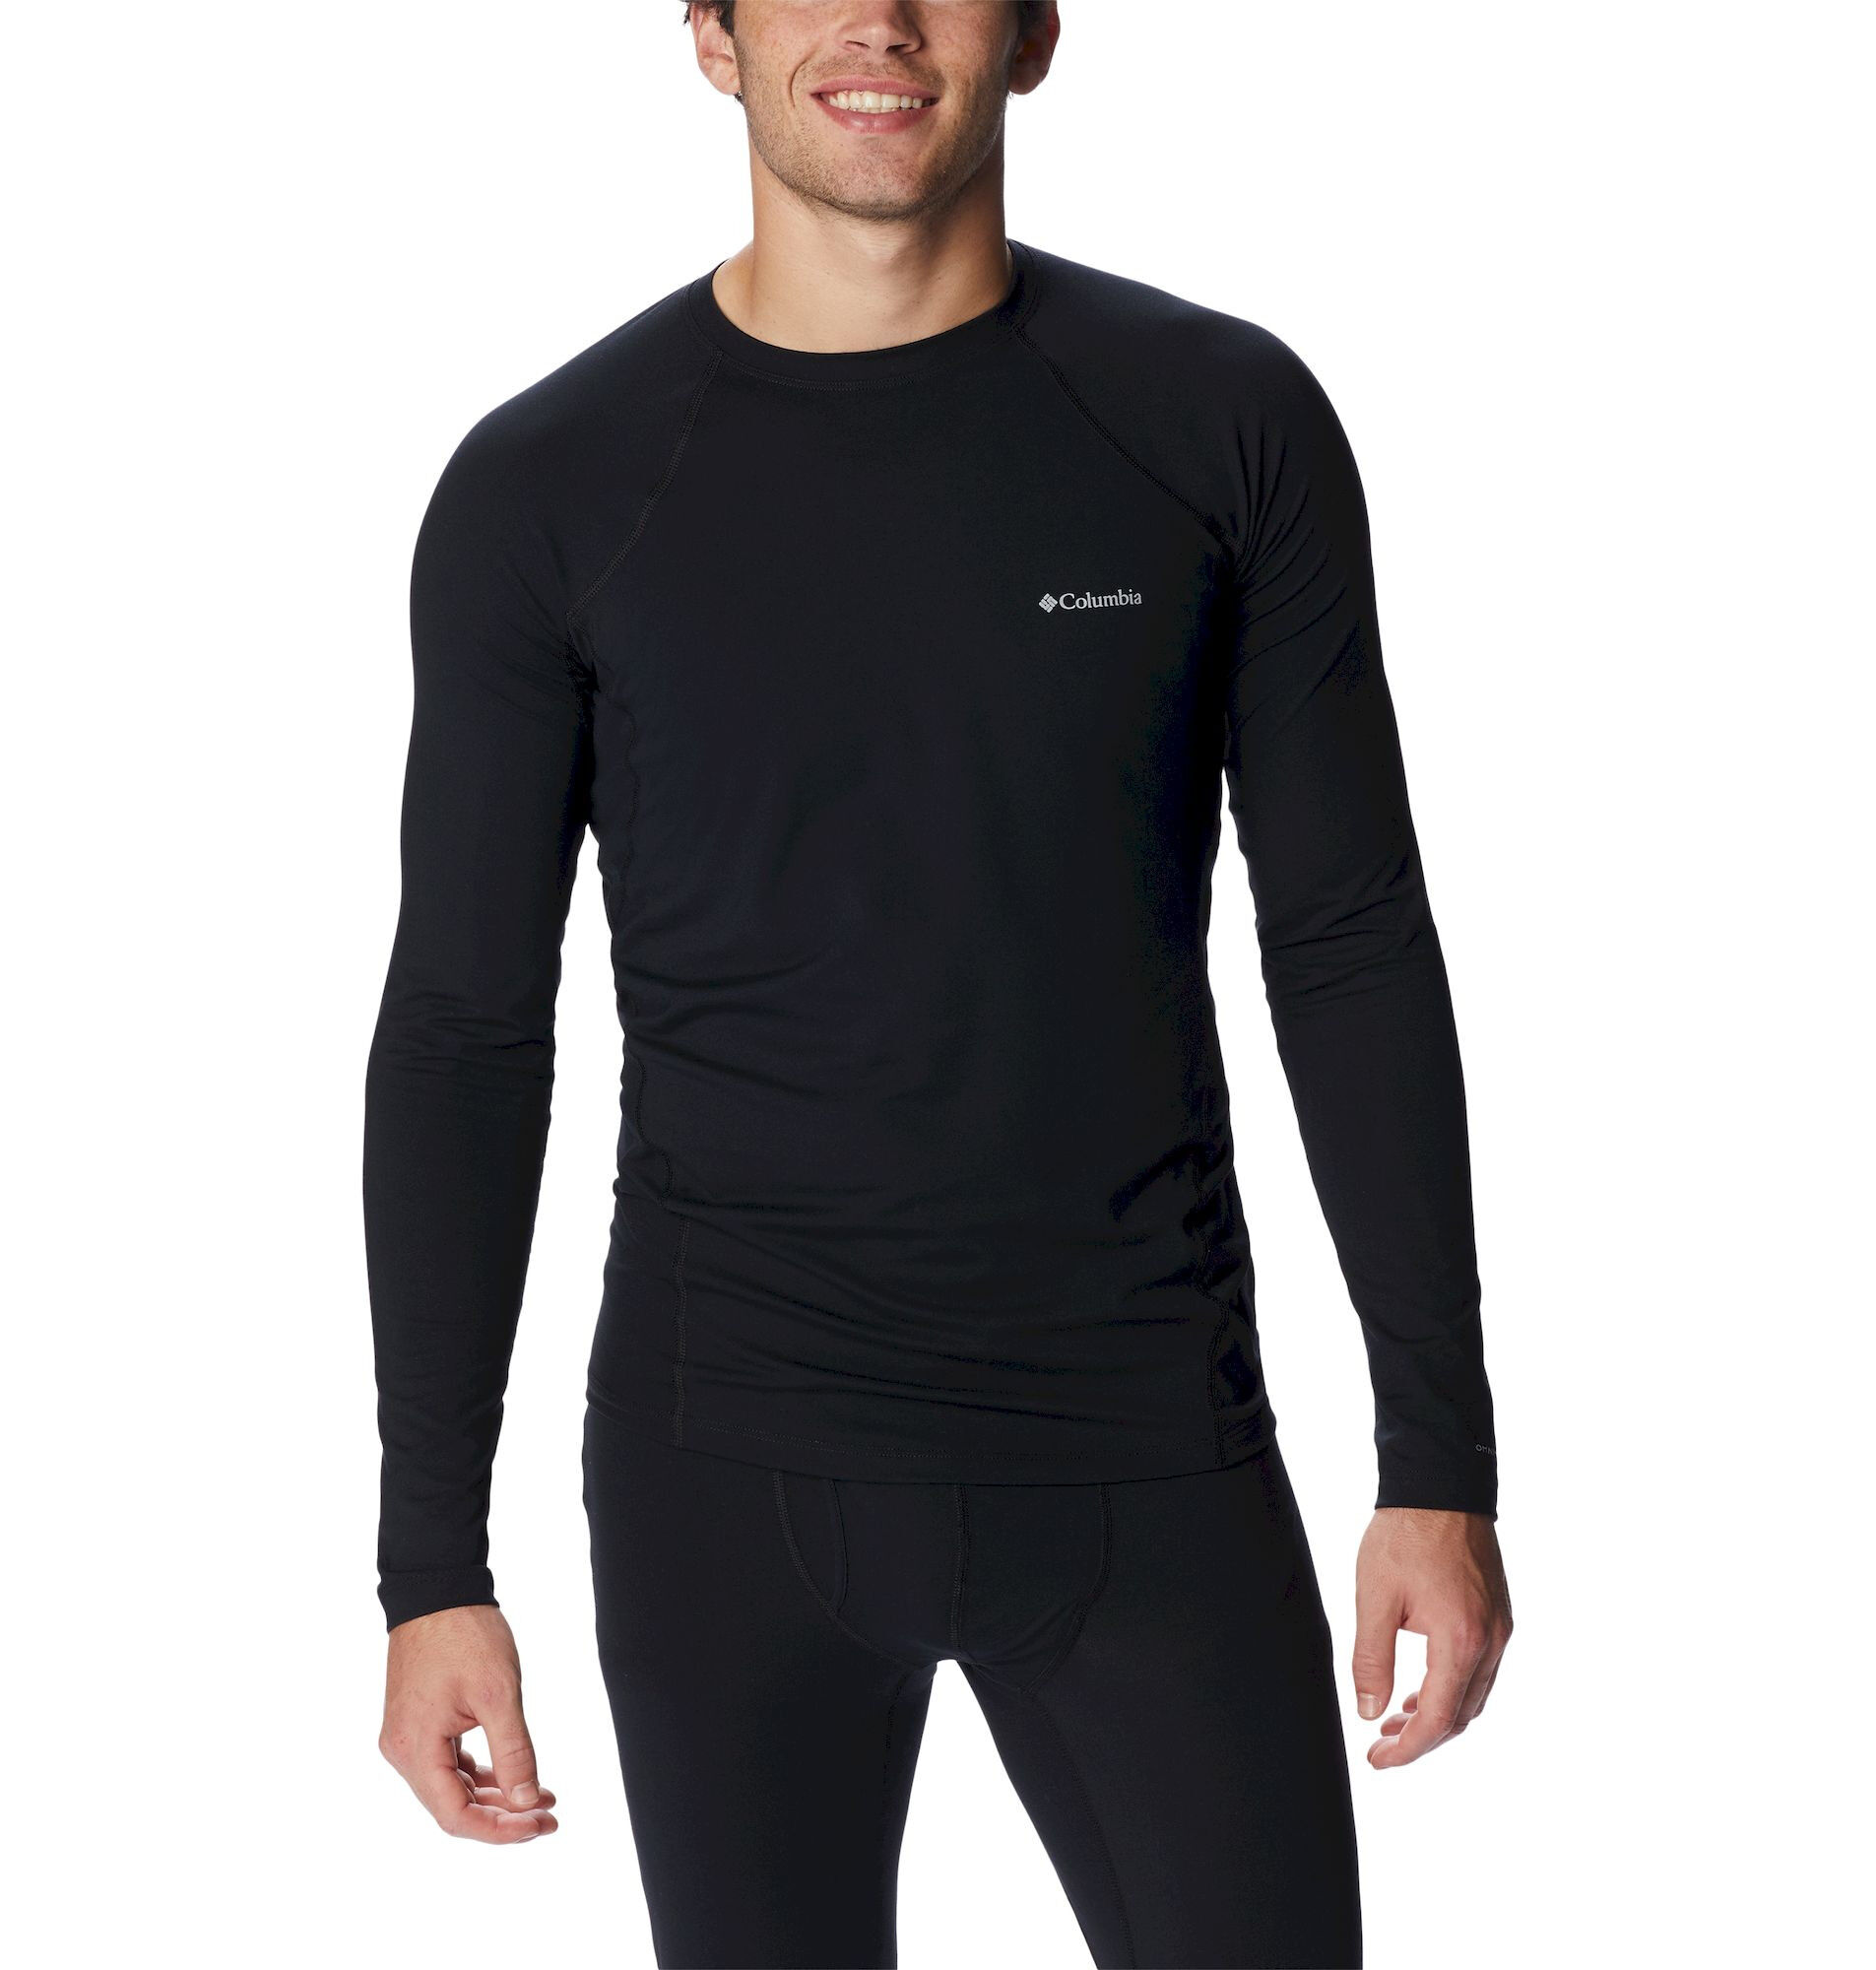 Columbia Midweight Stretch Long Sleeve Top - Base layer - Men's